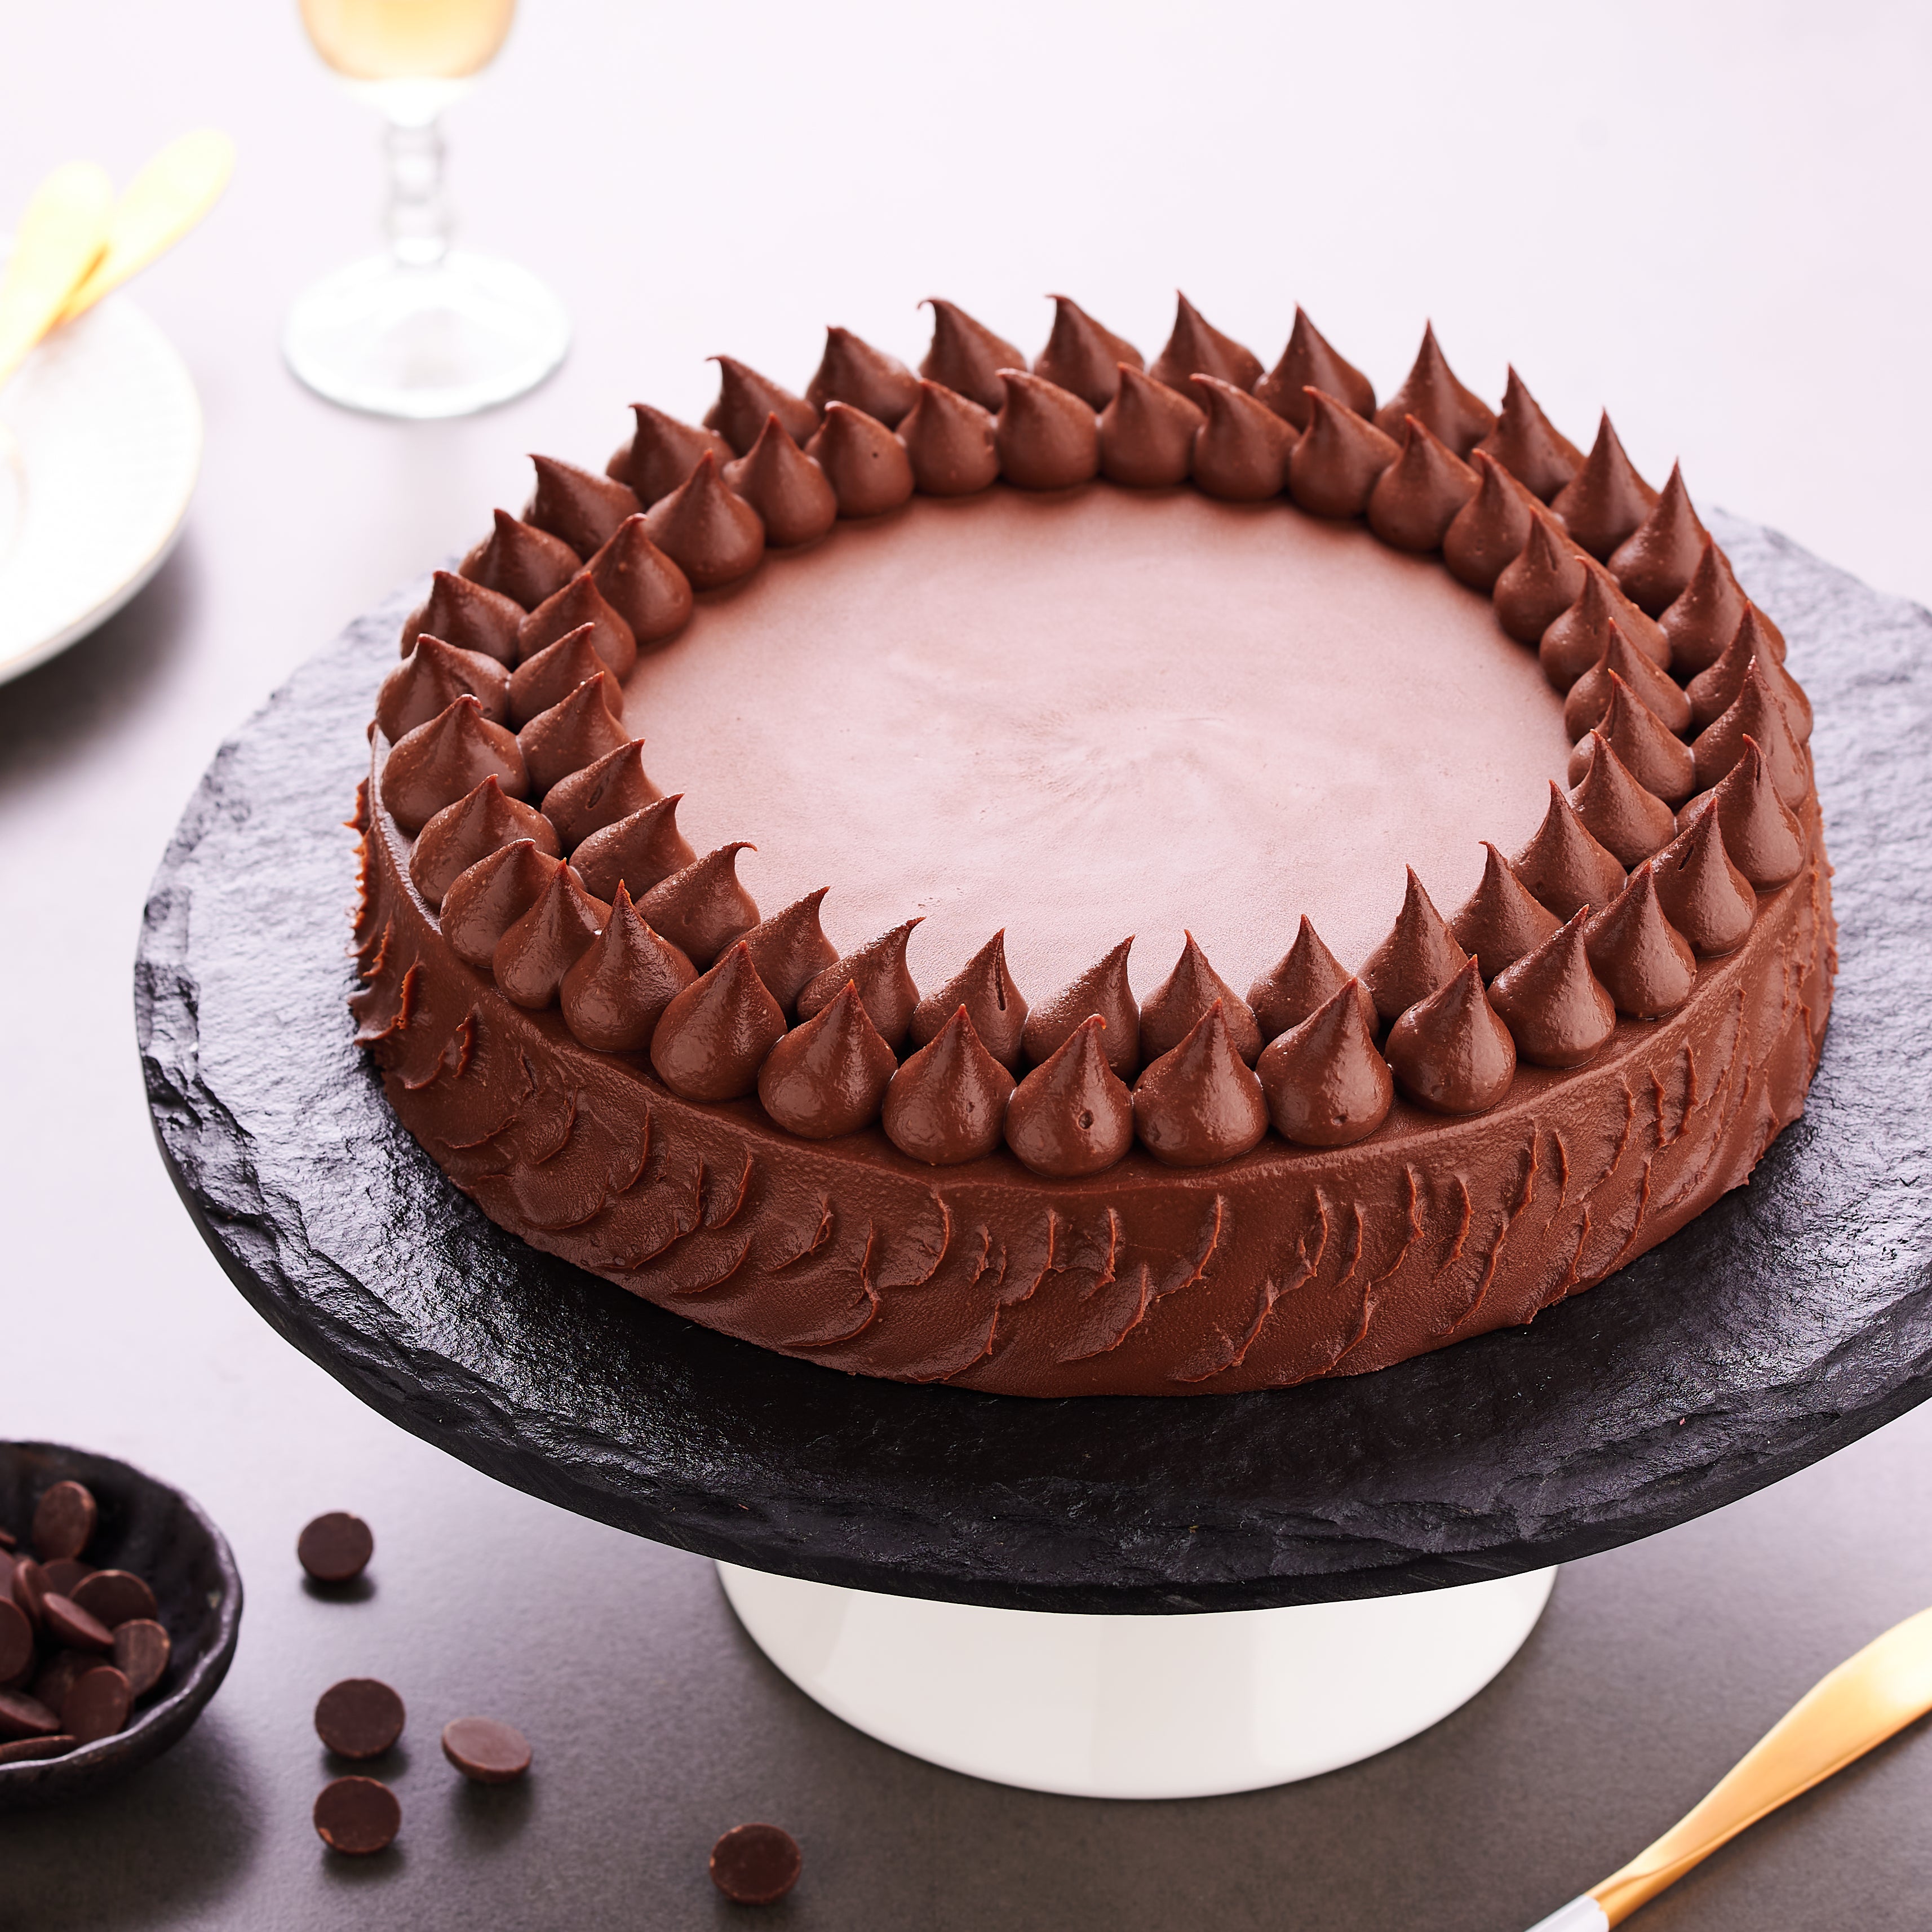 7 Low-Carb Diabetic Cake Recipes: Chocolate Cake, Cheesecake, and More